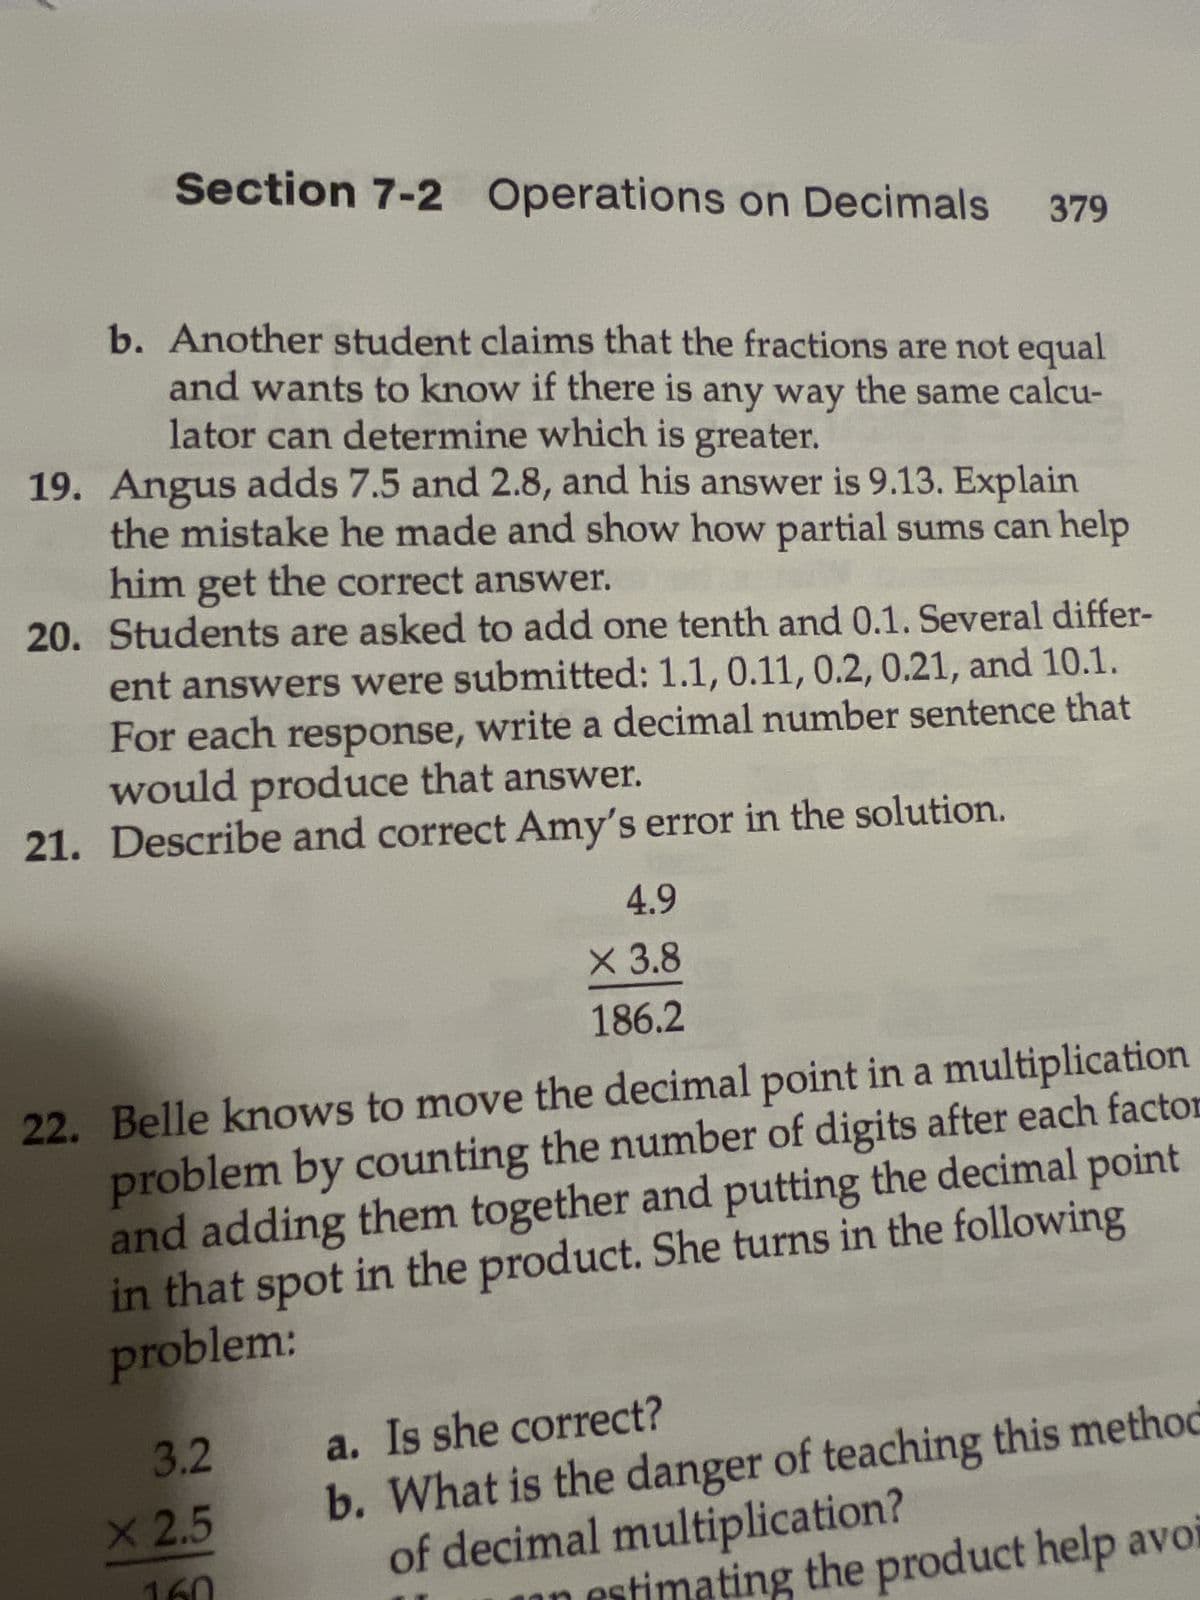 Section 7-2 Operations on Decimals 379
b. Another student claims that the fractions are not equal
and wants to know if there is any way the same calcu-
lator can determine which is greater.
19. Angus adds 7.5 and 2.8, and his answer is 9.13. Explain
the mistake he made and show how partial sums can help
him get the correct answer.
20. Students are asked to add one tenth and 0.1. Several differ-
ent answers were submitted: 1.1, 0.11, 0.2, 0.21, and 10.1.
For each response, write a decimal number sentence that
would produce that answer.
21. Describe and correct Amy's error in the solution.
4.9
X 3.8
186.2
22. Belle knows to move the decimal point in a multiplication
problem by counting the number of digits after each factor
and adding them together and putting the decimal point
in that spot in the product. She turns in the following
problem:
3.2
X 2.5
a. Is she correct?
b. What is the danger of teaching this method
of decimal multiplication?
timating the product help avoi